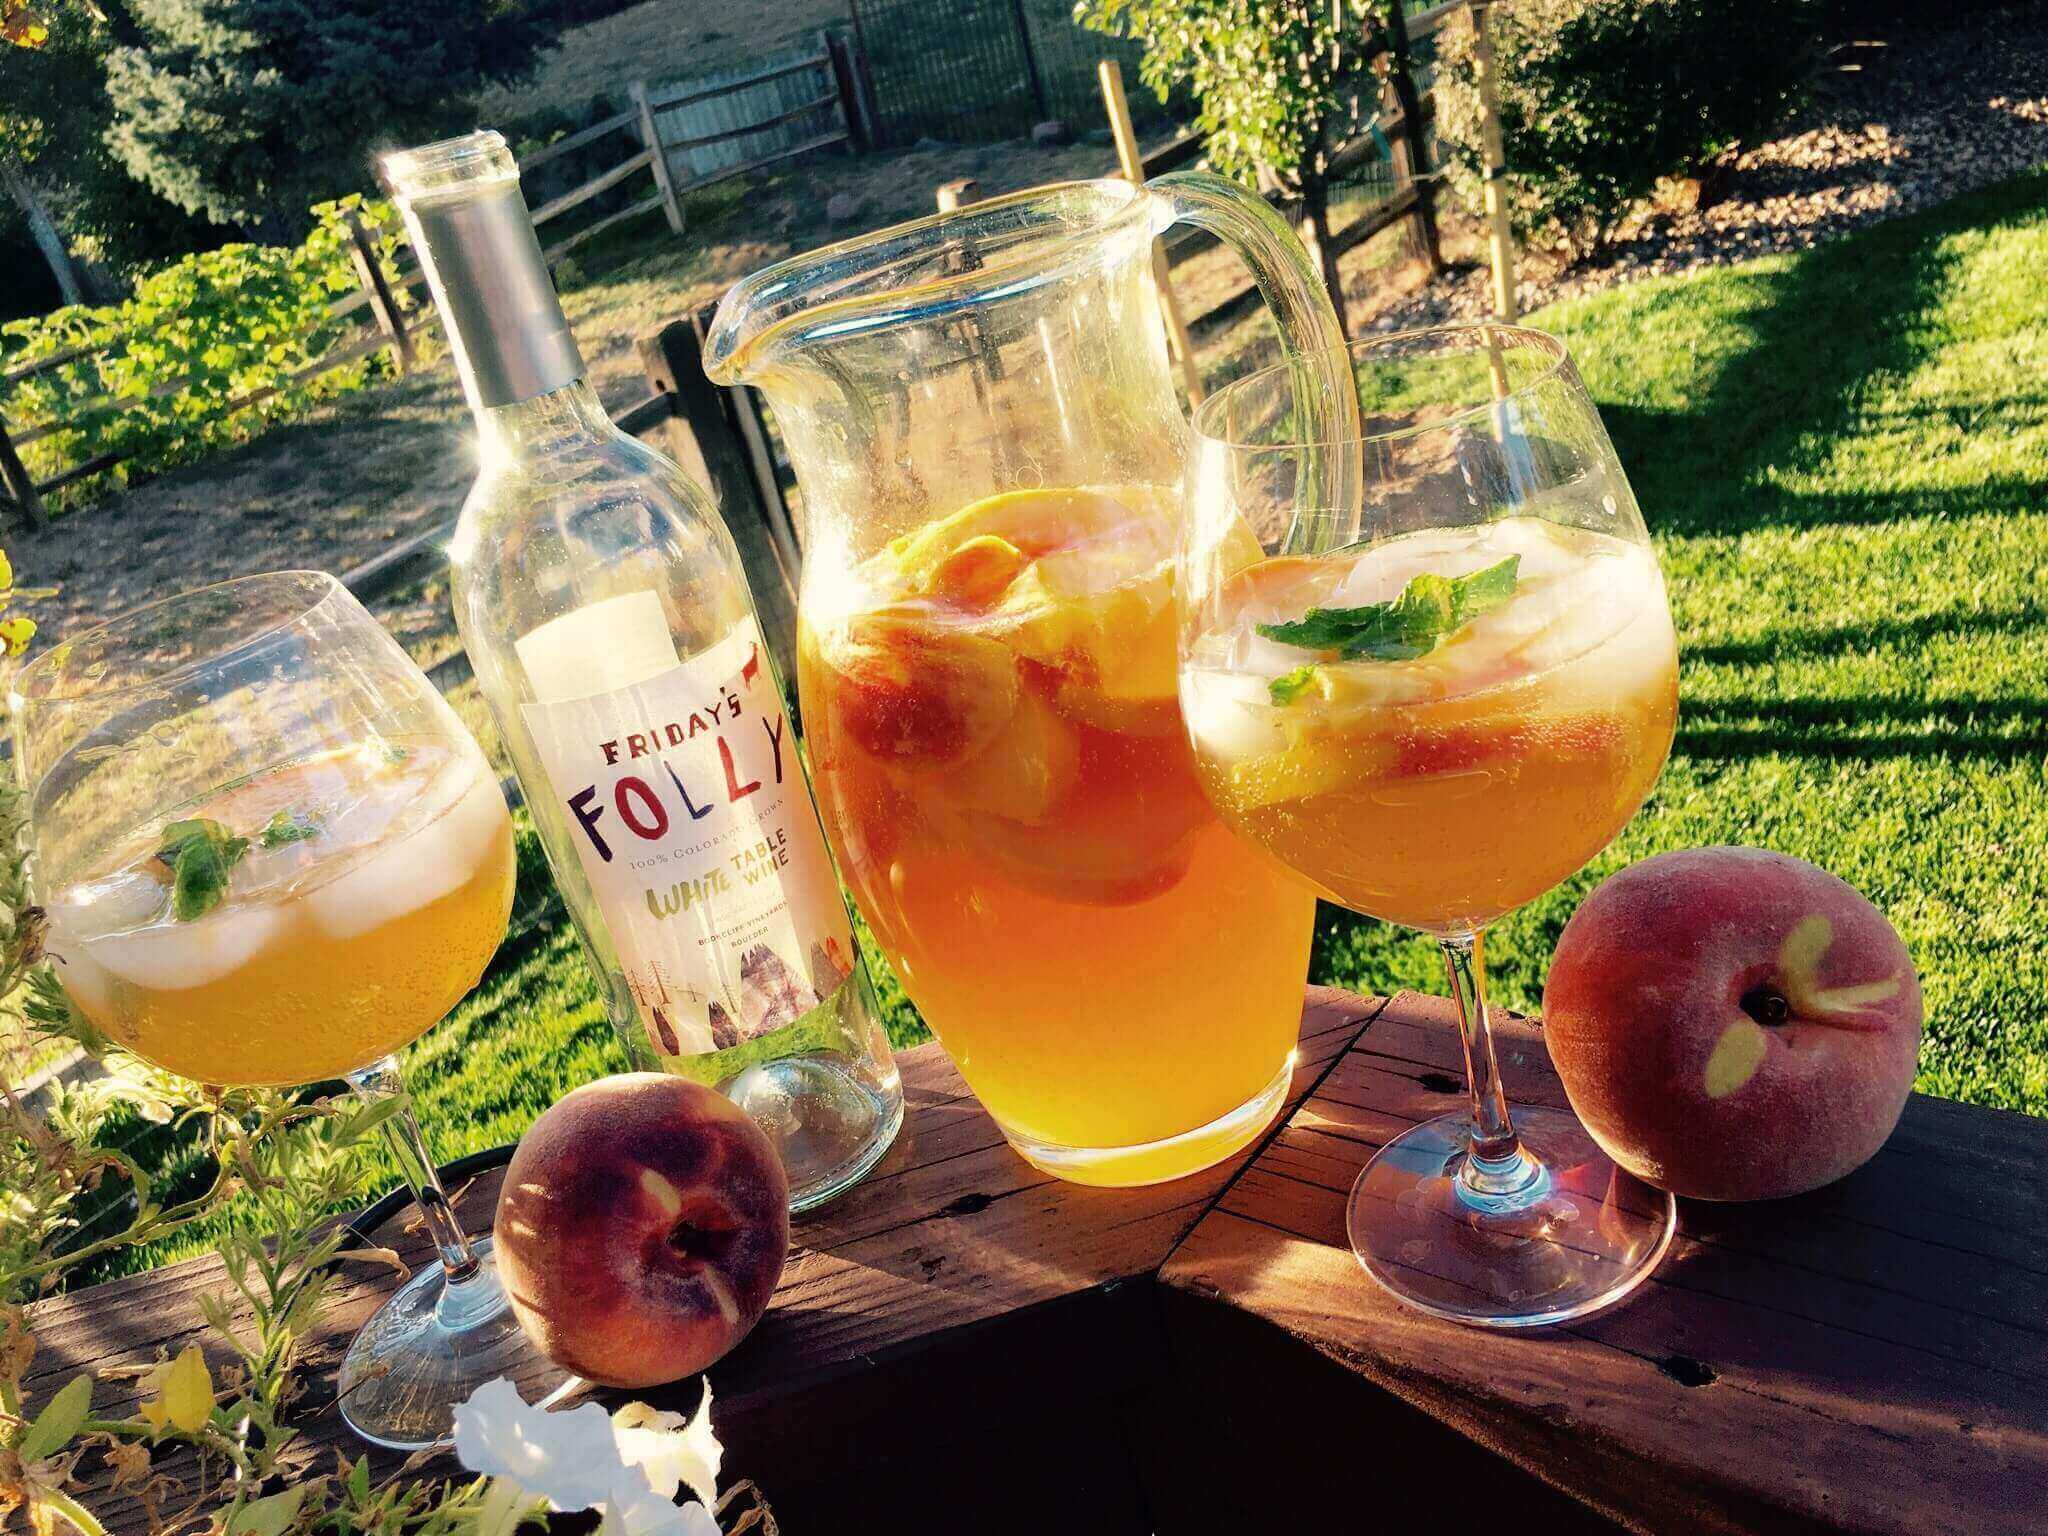 Palisade Peach Sangria, Palisade Peaches and Palisade Sourced White Table Wine